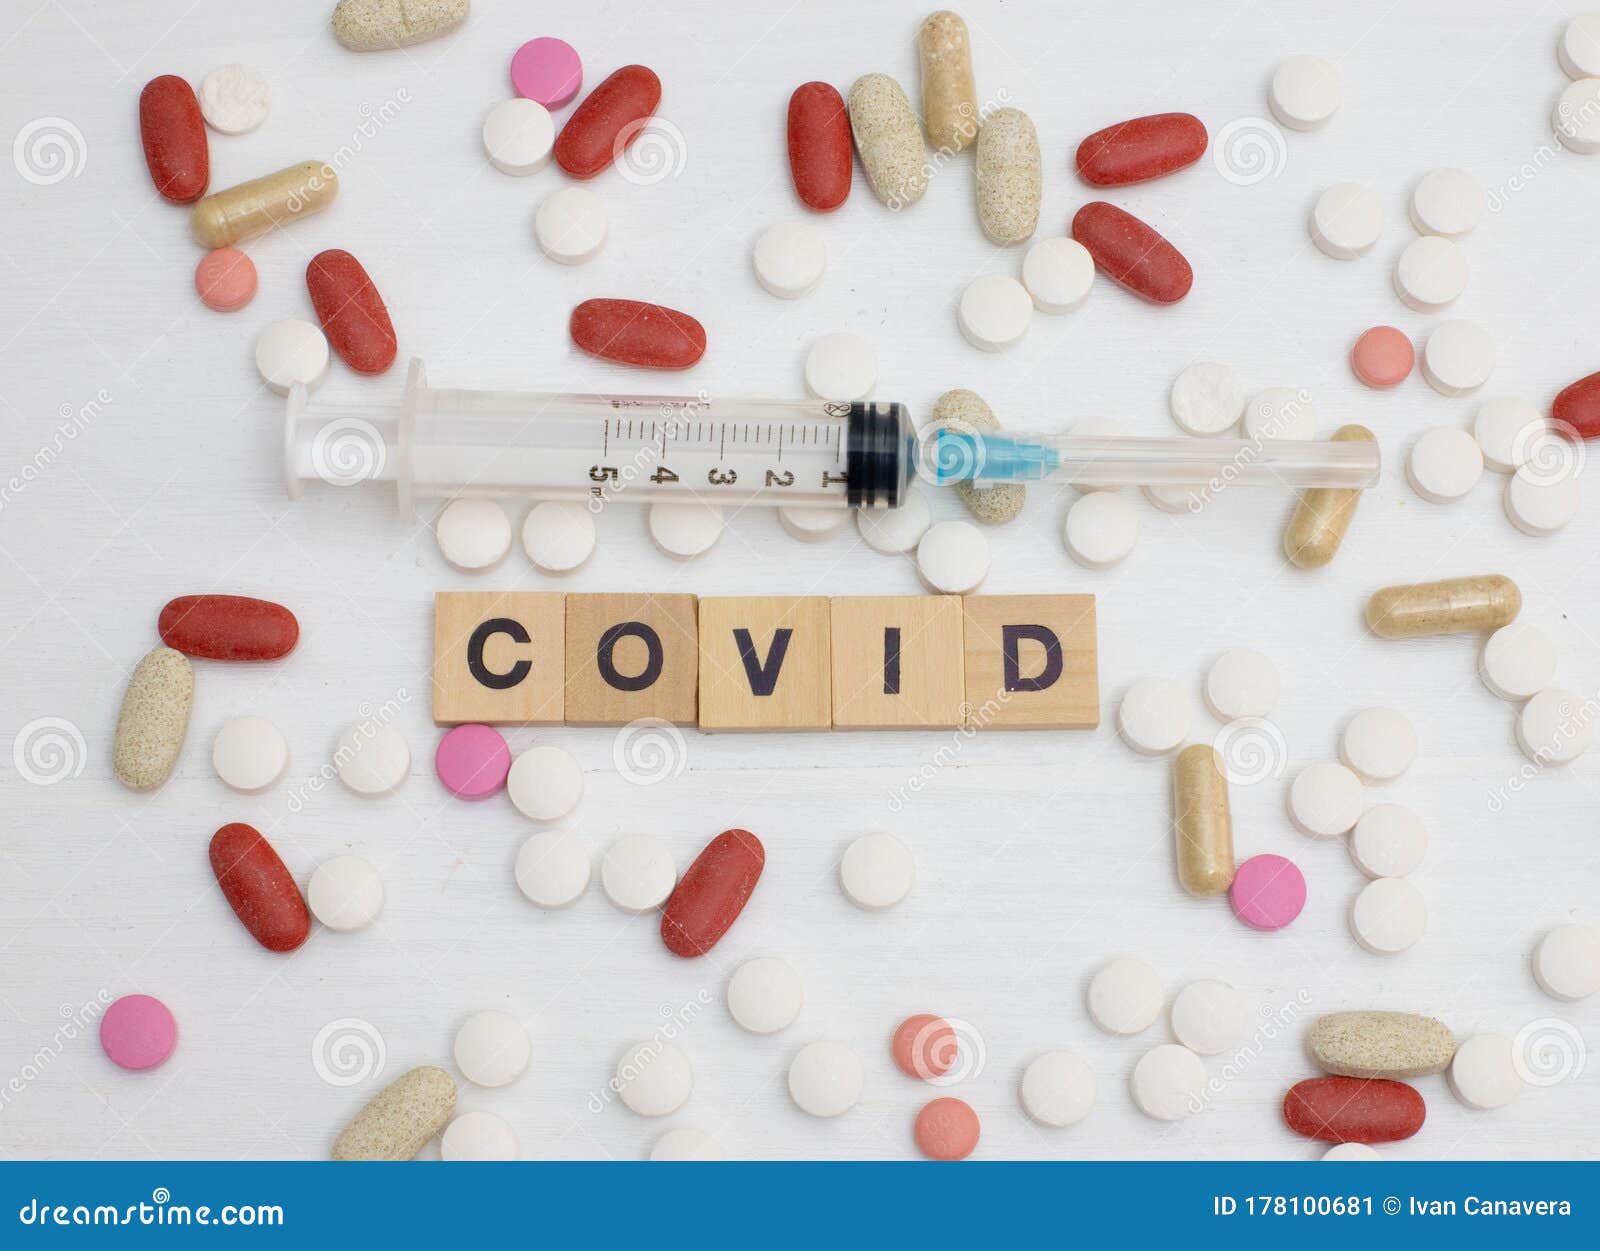 eggs drawn frightened faces alcohol syringe covid-19 and coronavirus,tablets